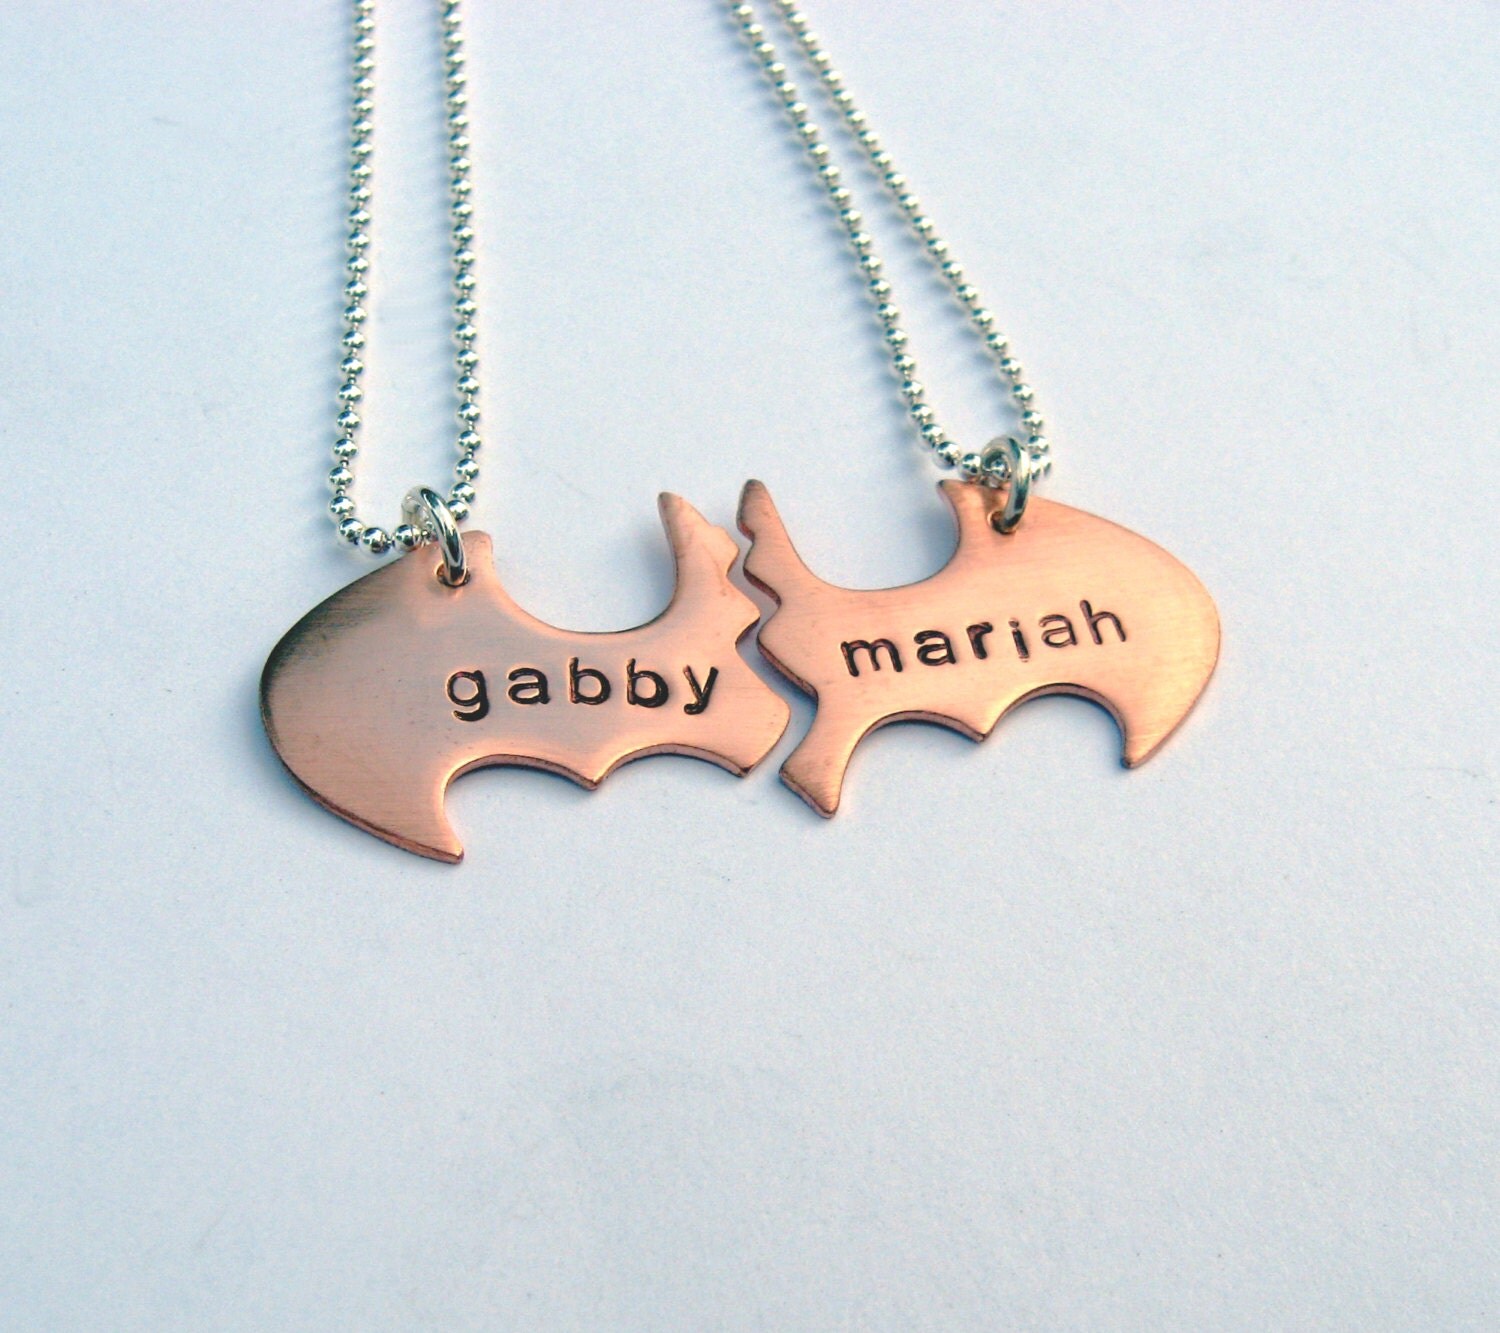 Batman Best Friend necklaces Personalized by VisionQuest on Etsy